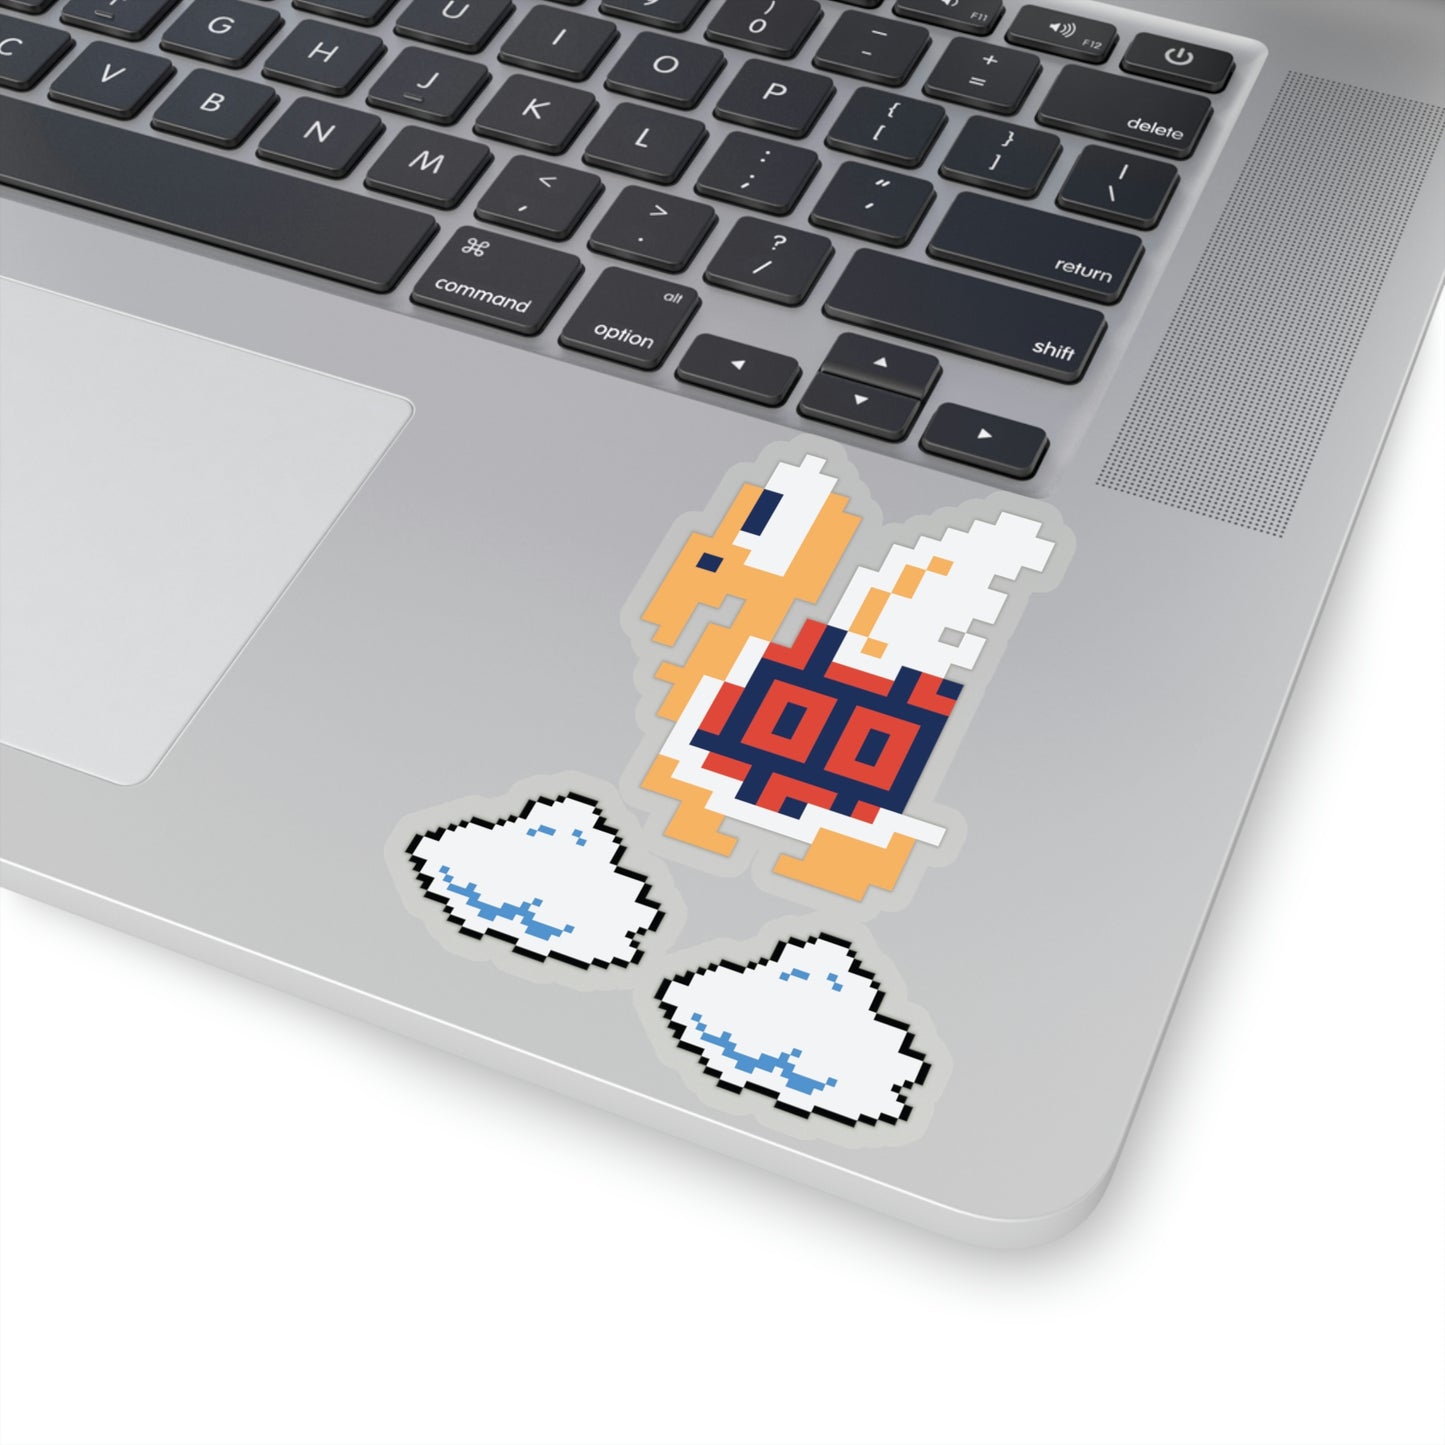 Turtle in the Clouds Sticker